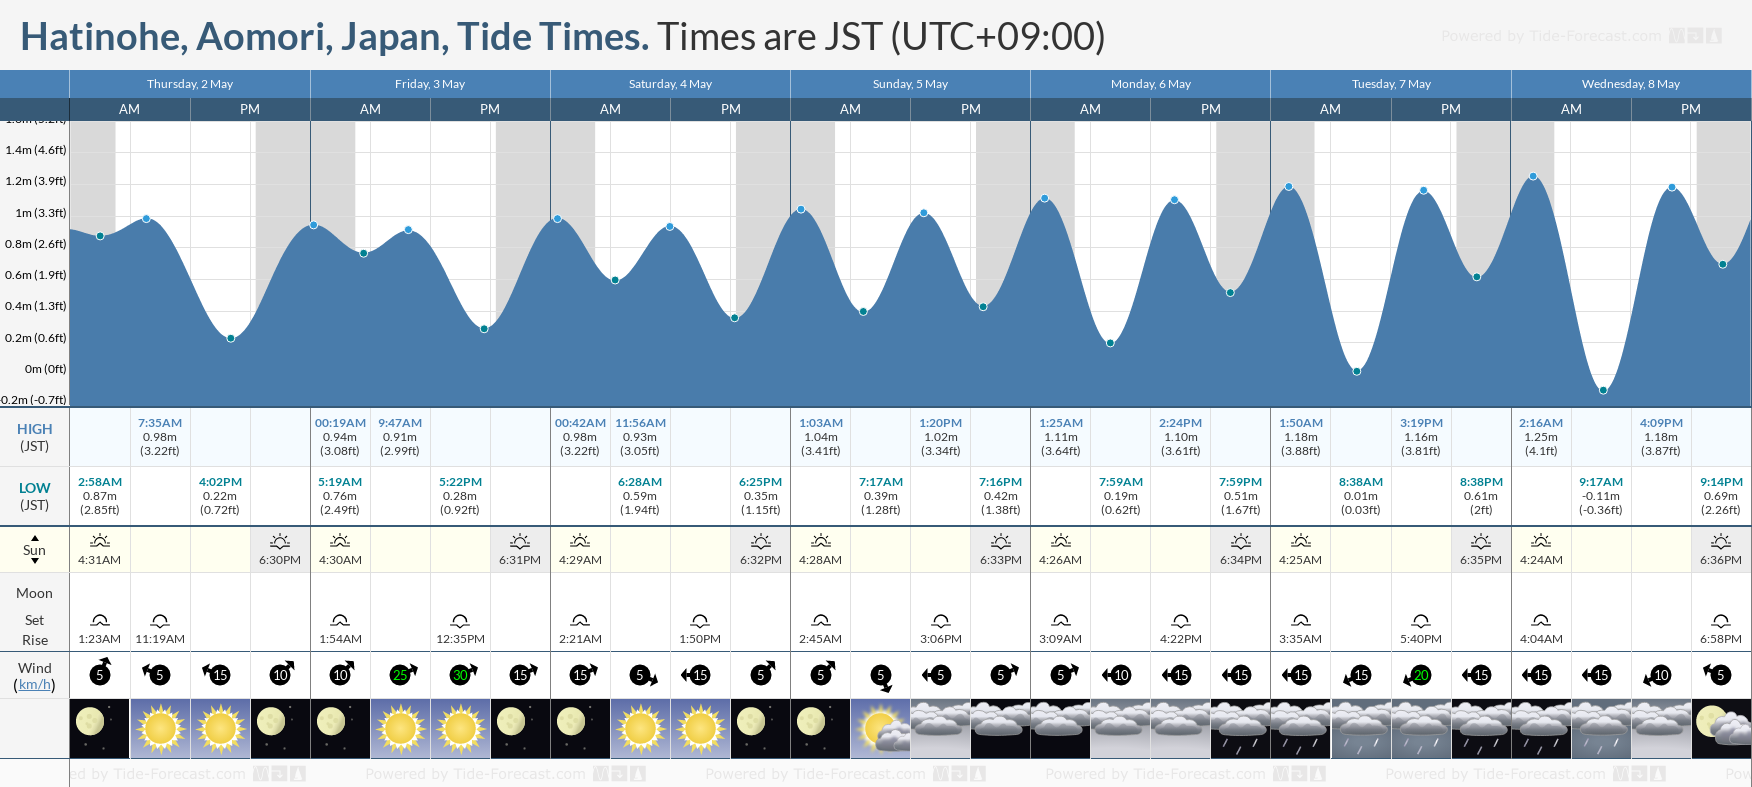 Hatinohe, Aomori, Japan Tide Chart including high and low tide tide times for the next 7 days